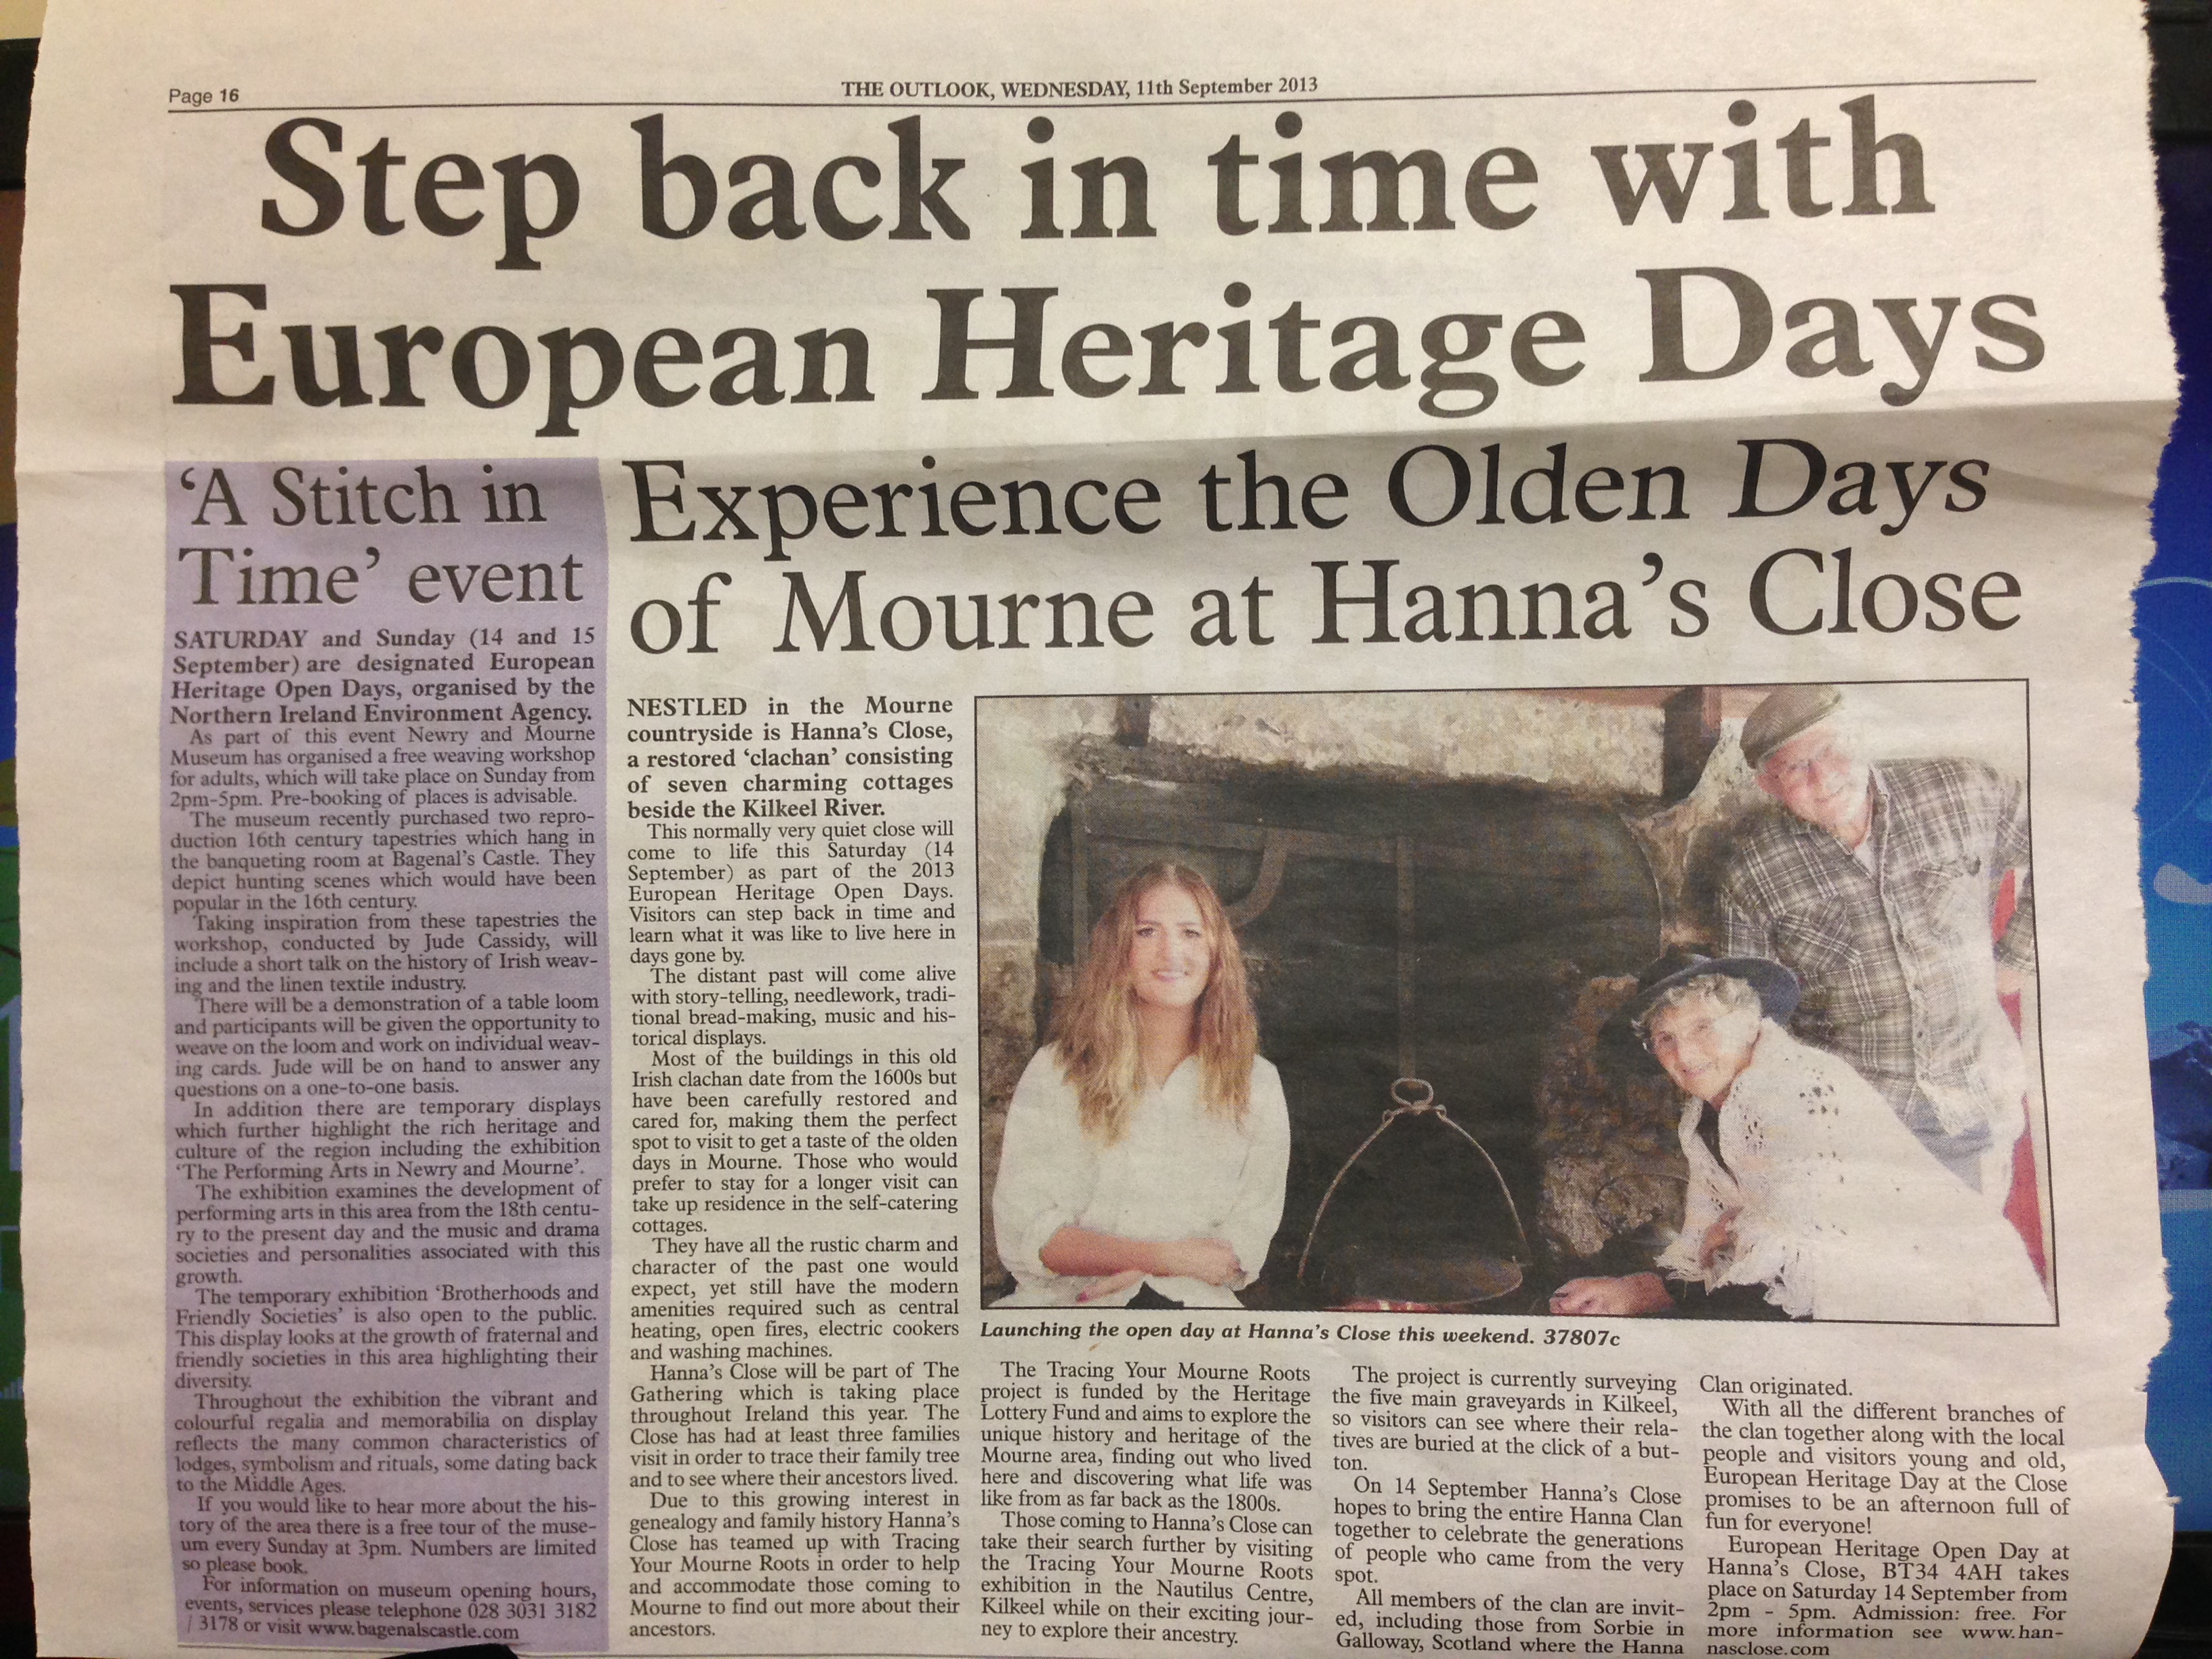 Press release in local paper The Outlook to promote EHODNI with Hanna's Close in September